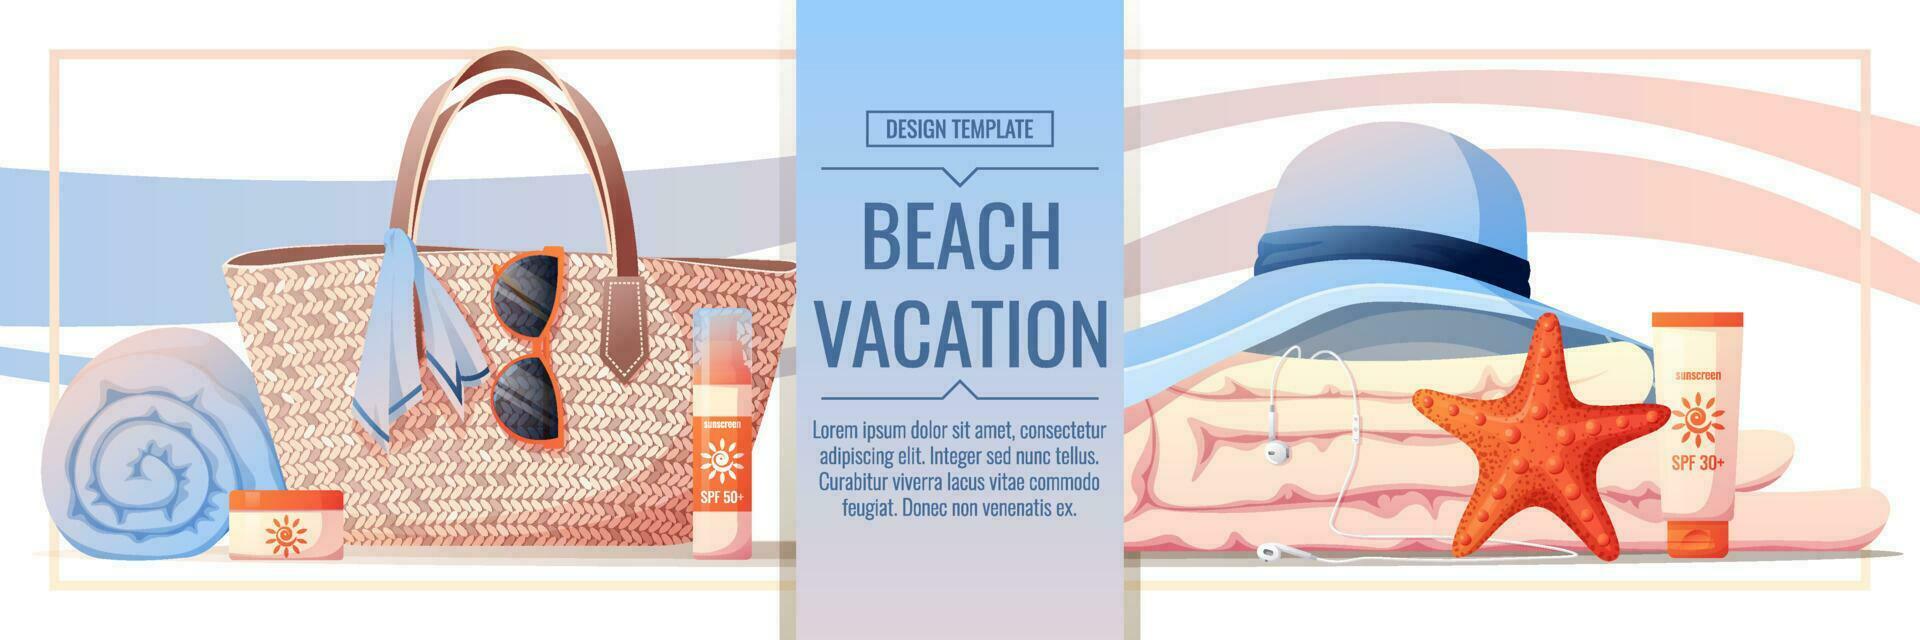 Beach banner with accessories for relaxing by the sea. Beach bag, sunscreen, glasses, towel, shells. Webbaner, poster, flyer, advertising. vector